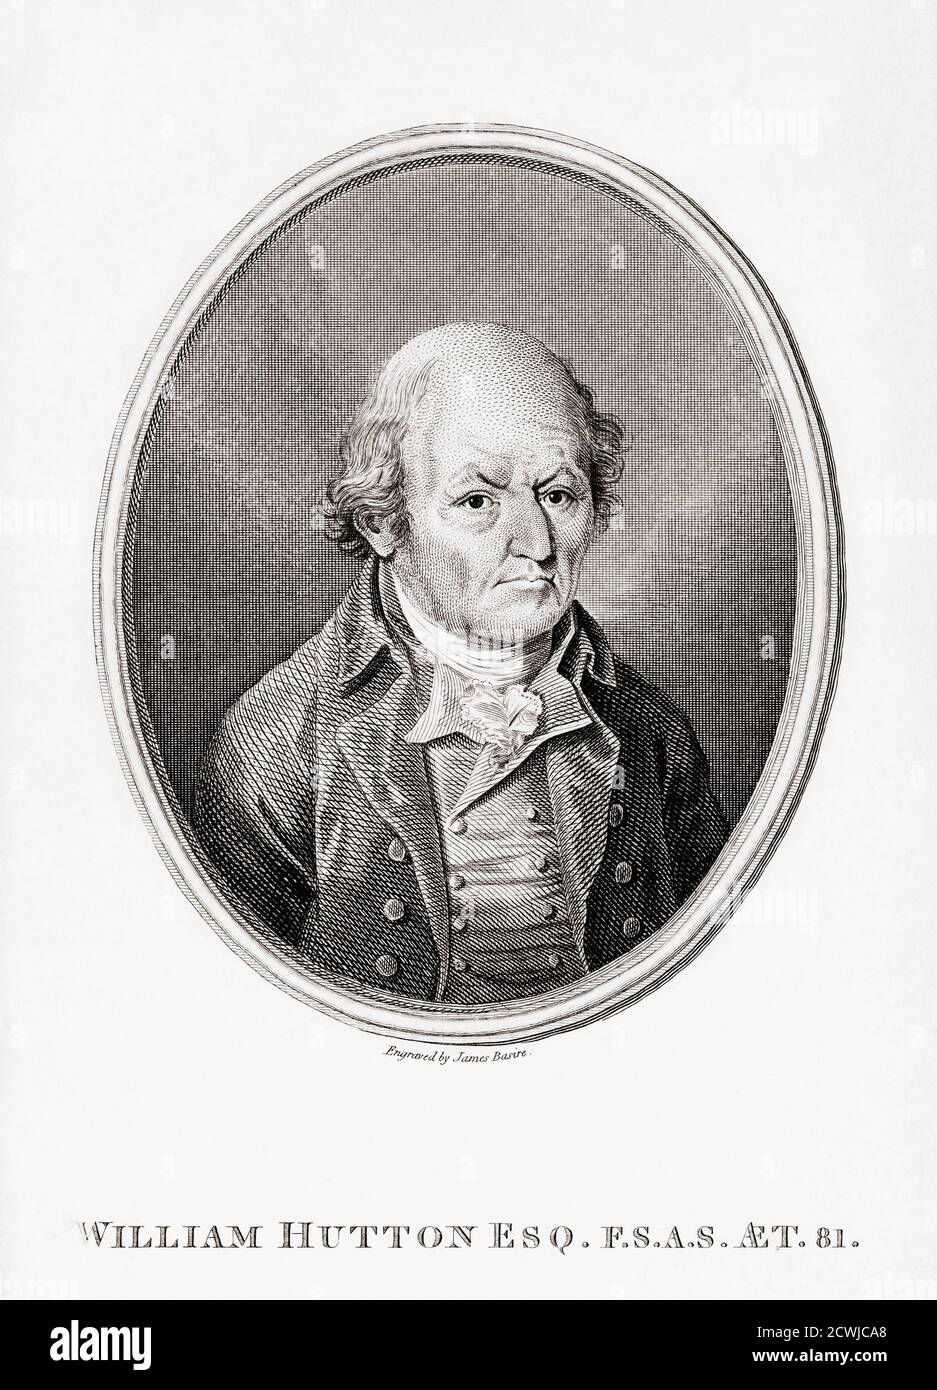 William Hutton, 1723 - 1815, English bookseller, poet, historian and travel writer.  He was the first important historian of the city of Birmingham and authored a book, History of Birmingham in 1781.  After an engraving by James Basire dated 1804. Stock Photo